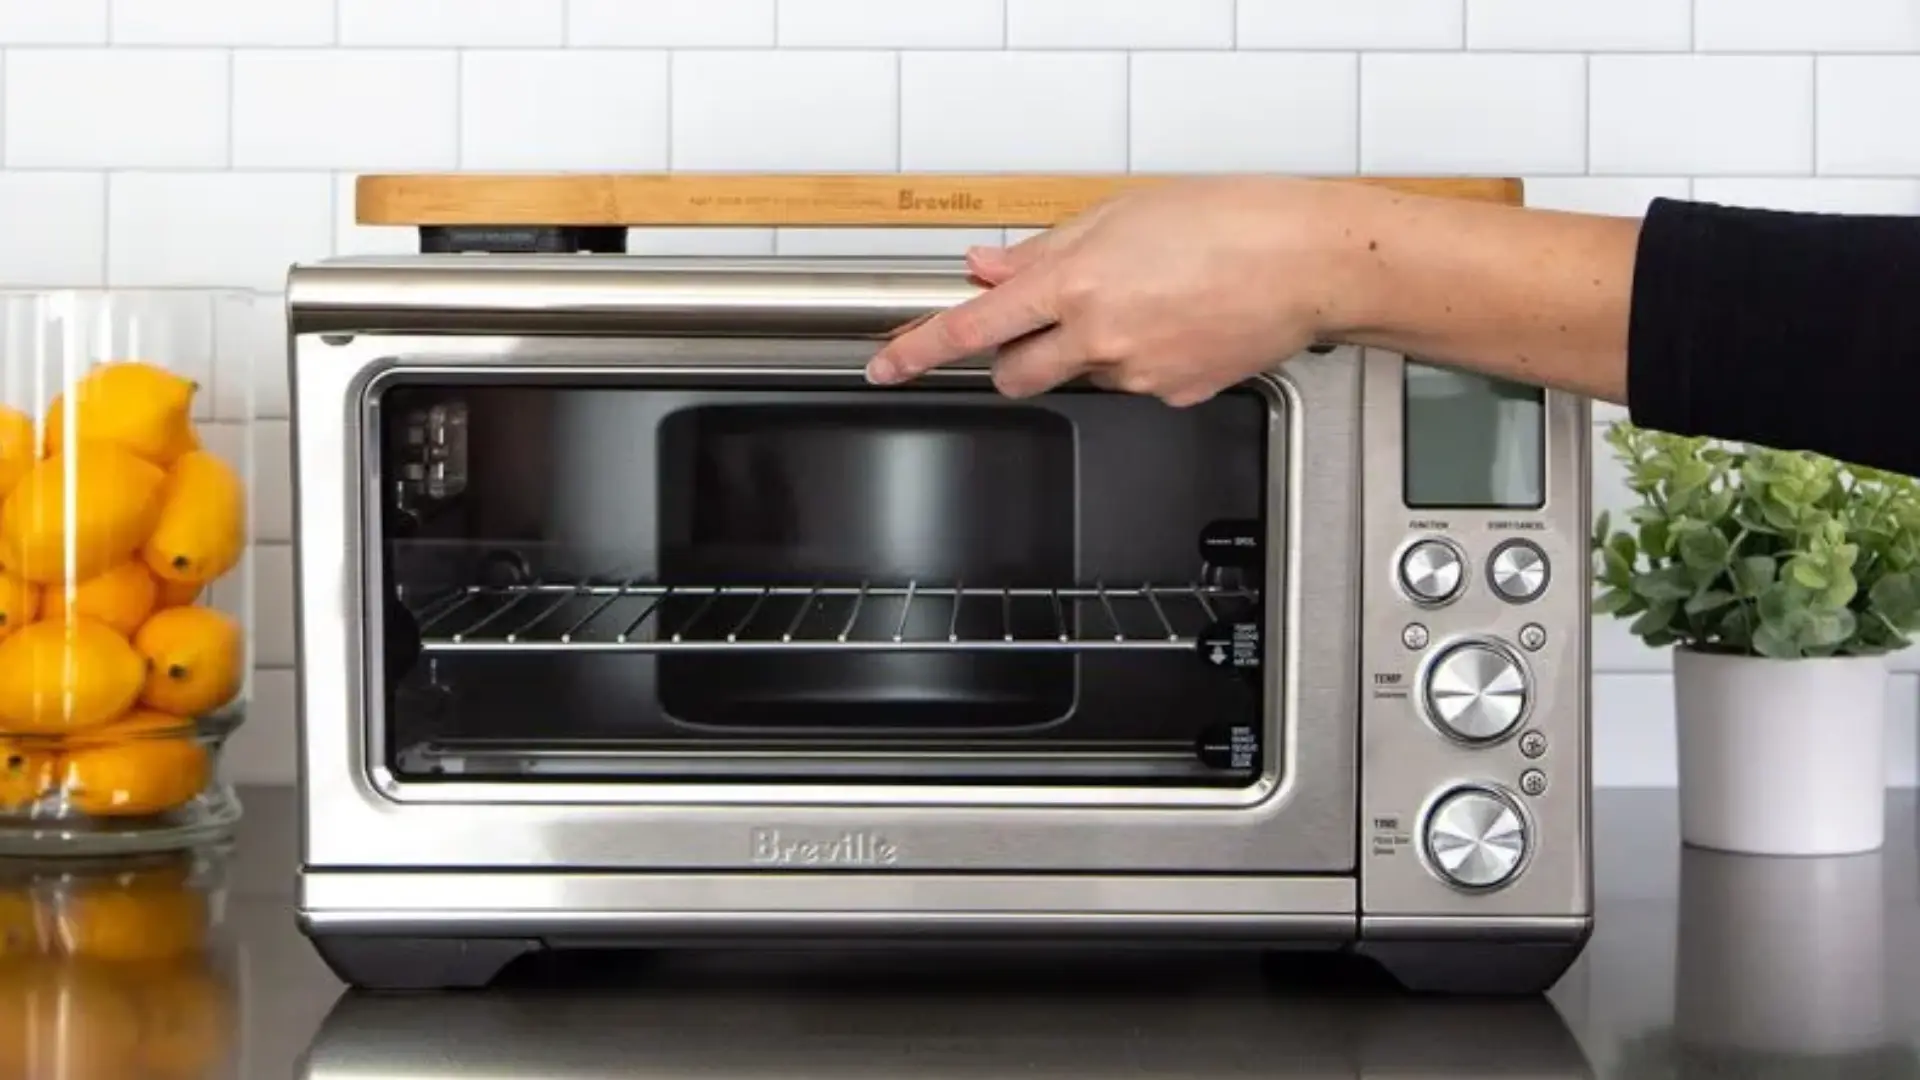 Breville Airfry Countertop oven